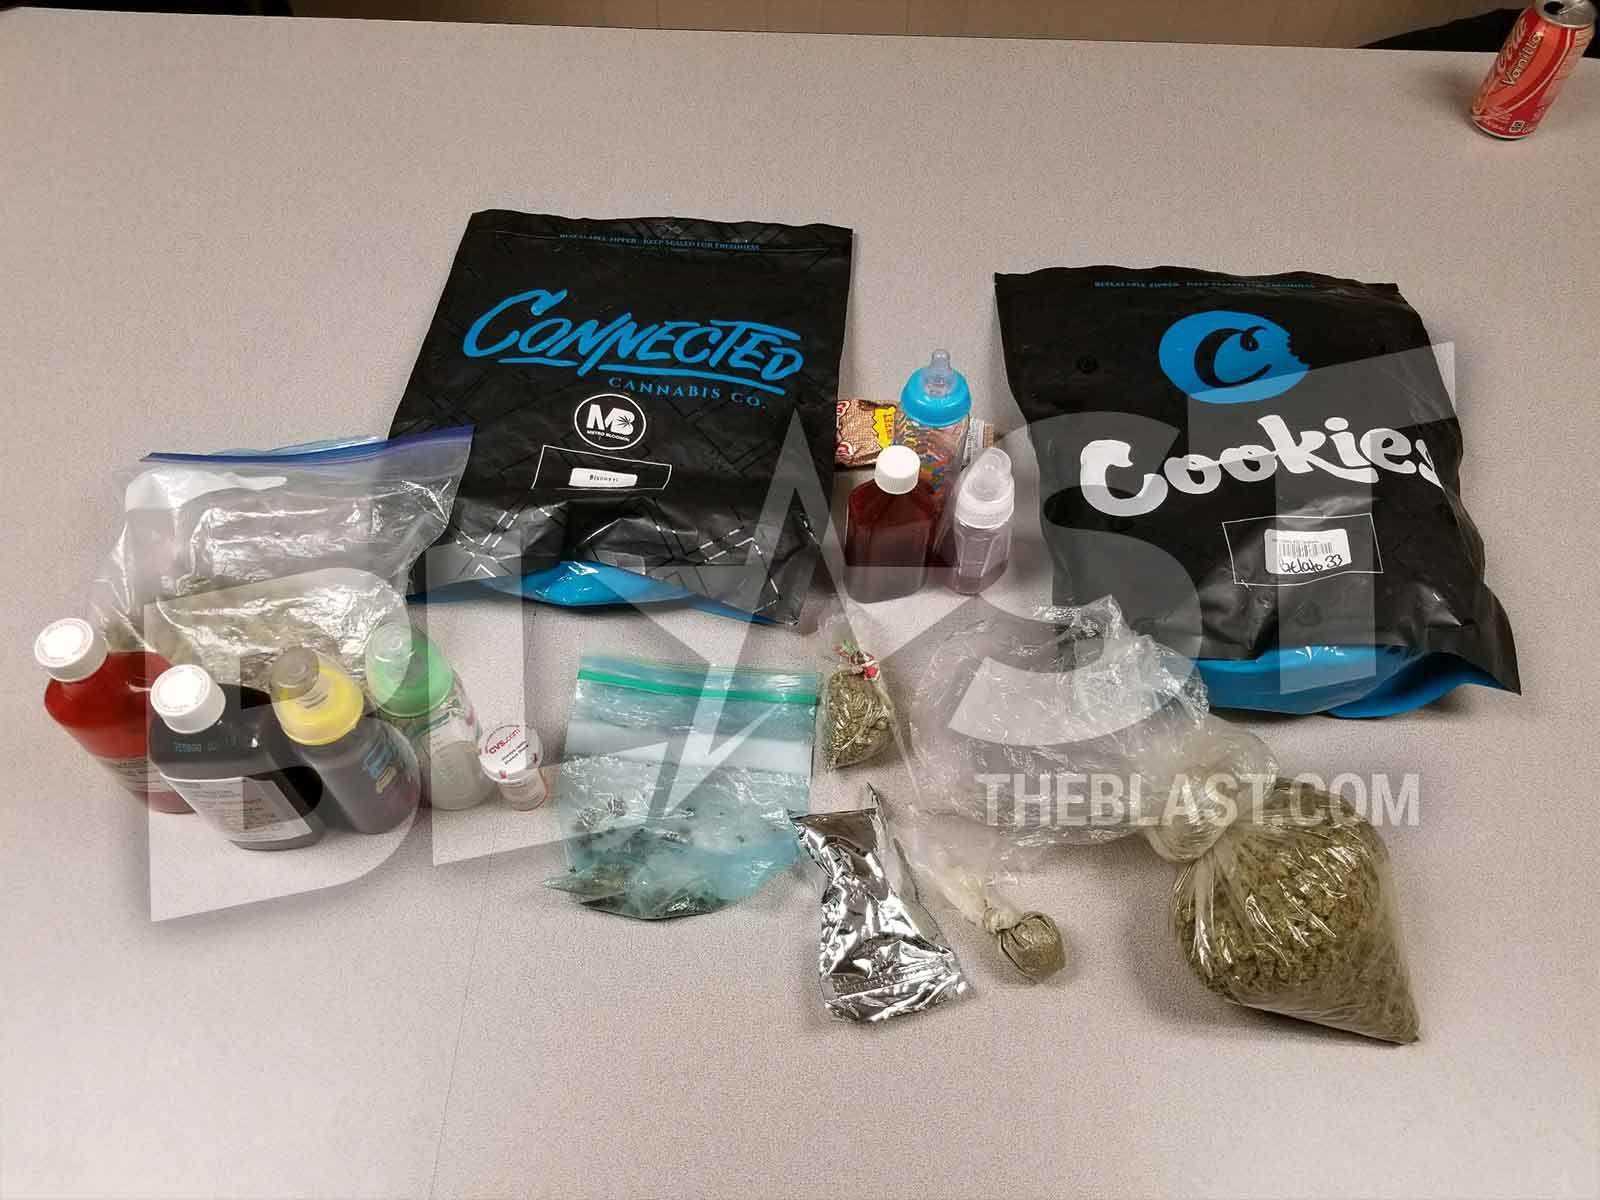 Migos’ Vehicle Pulled Over, 420 Grams of Pot & 26 Oz of Codeine Seized